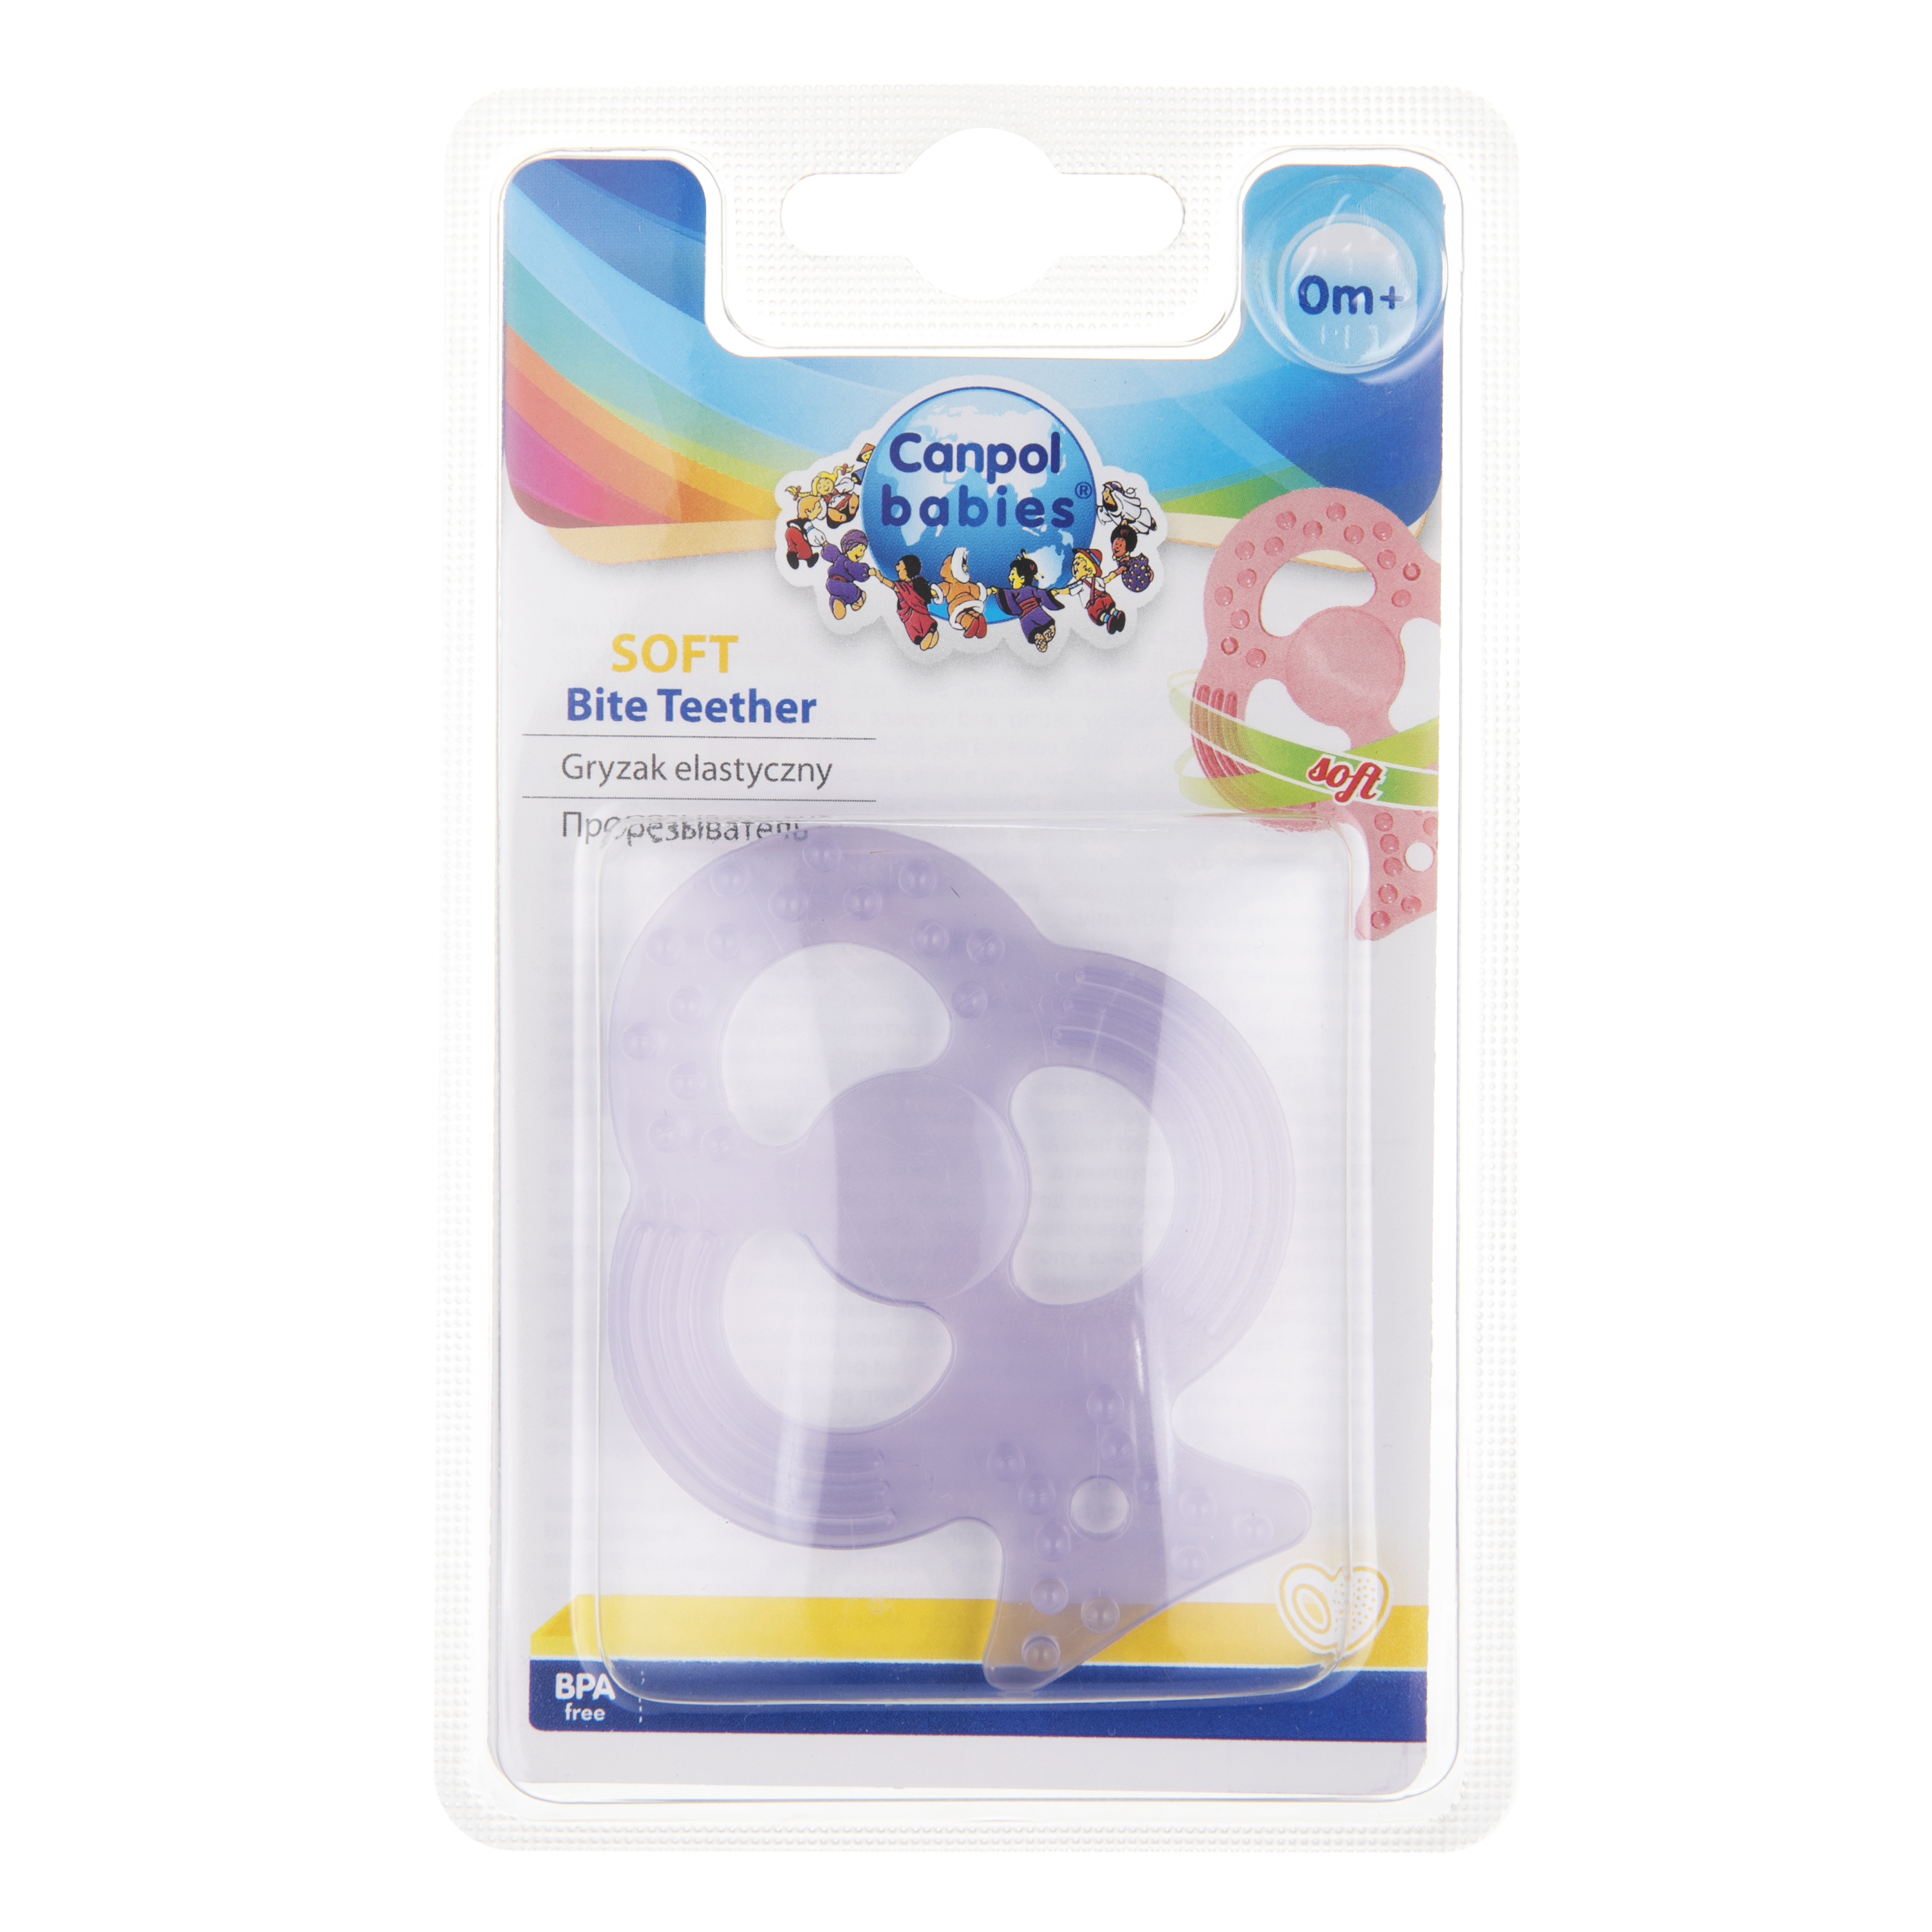 Free Bpa Canpol Babies Water teether with Rattle "ANIMALS" 0m light 